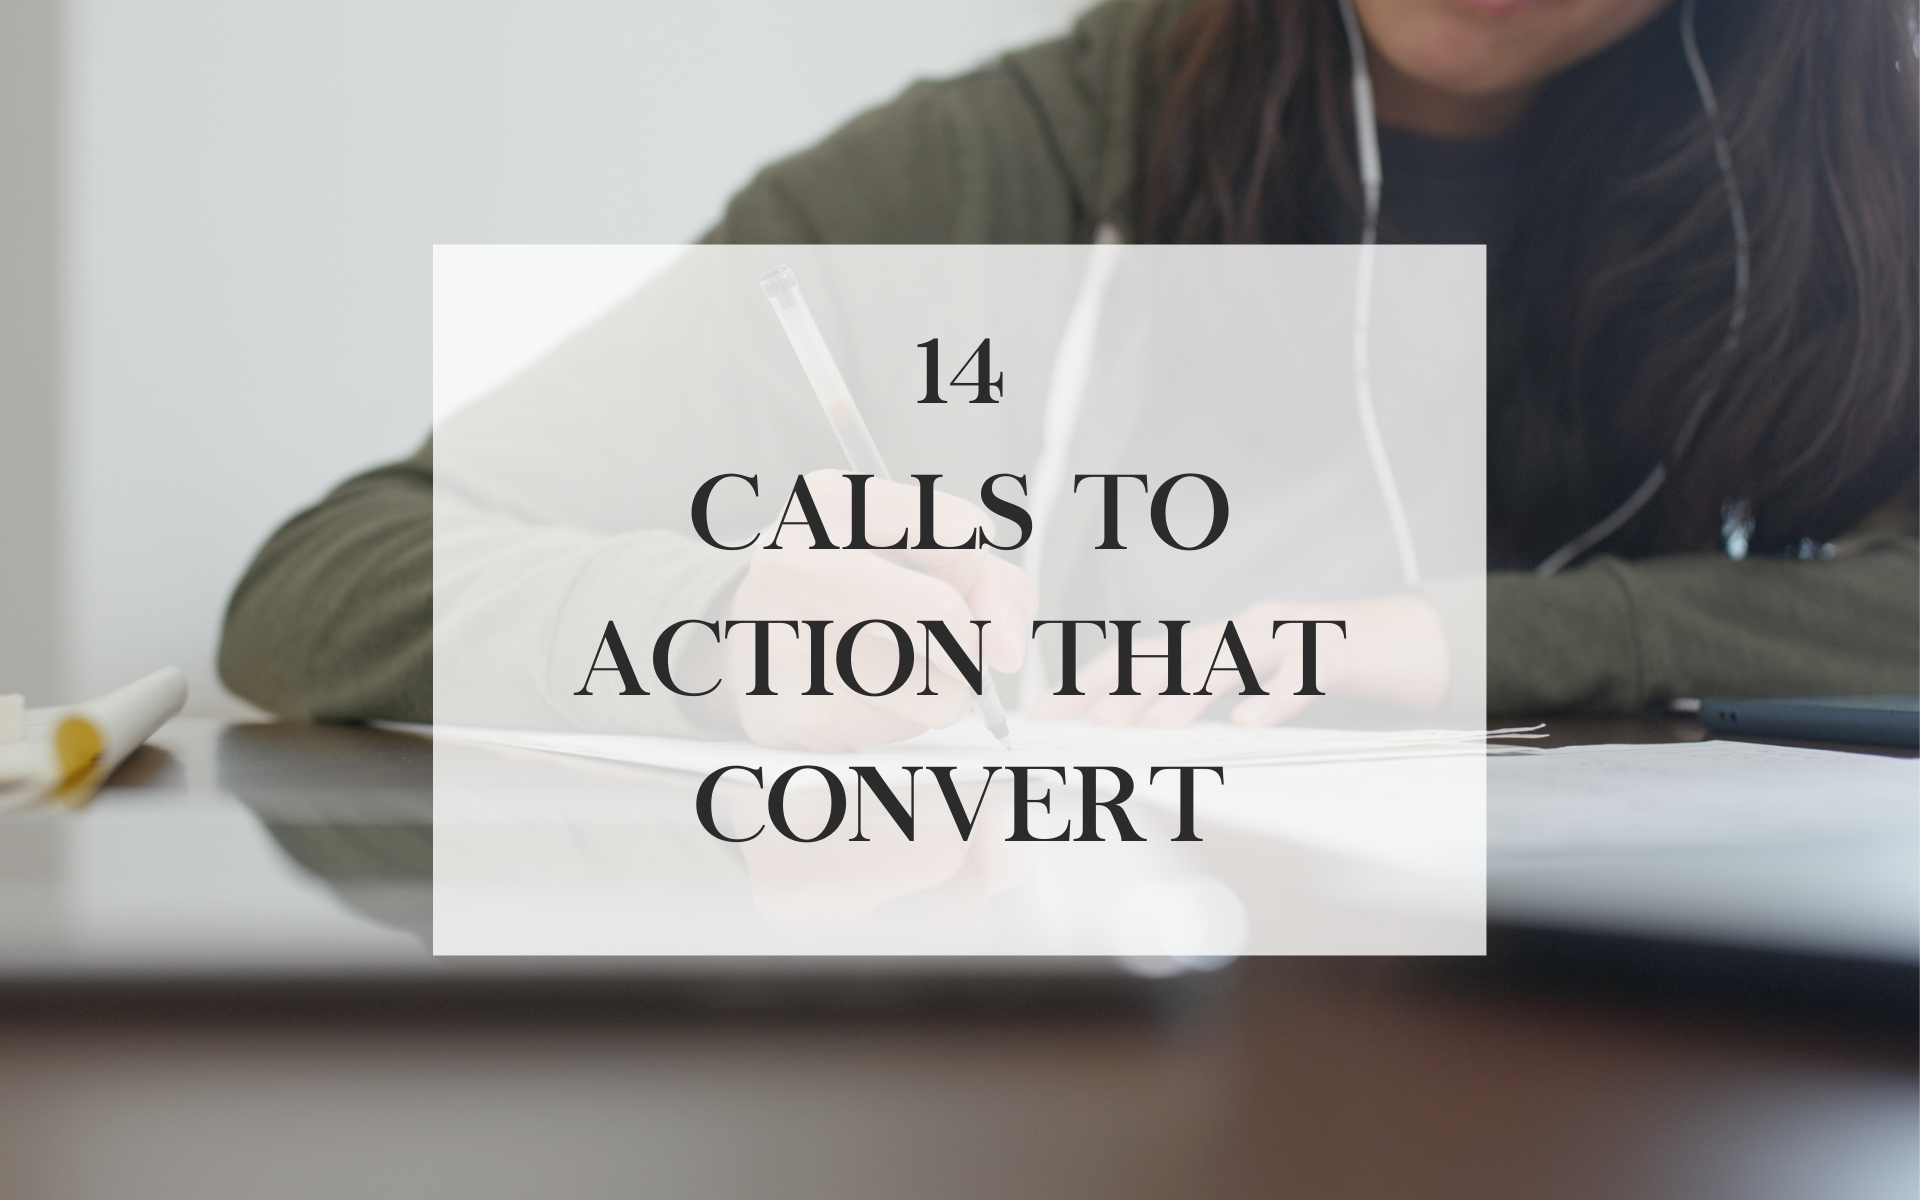 Fourteen calls to action that convert